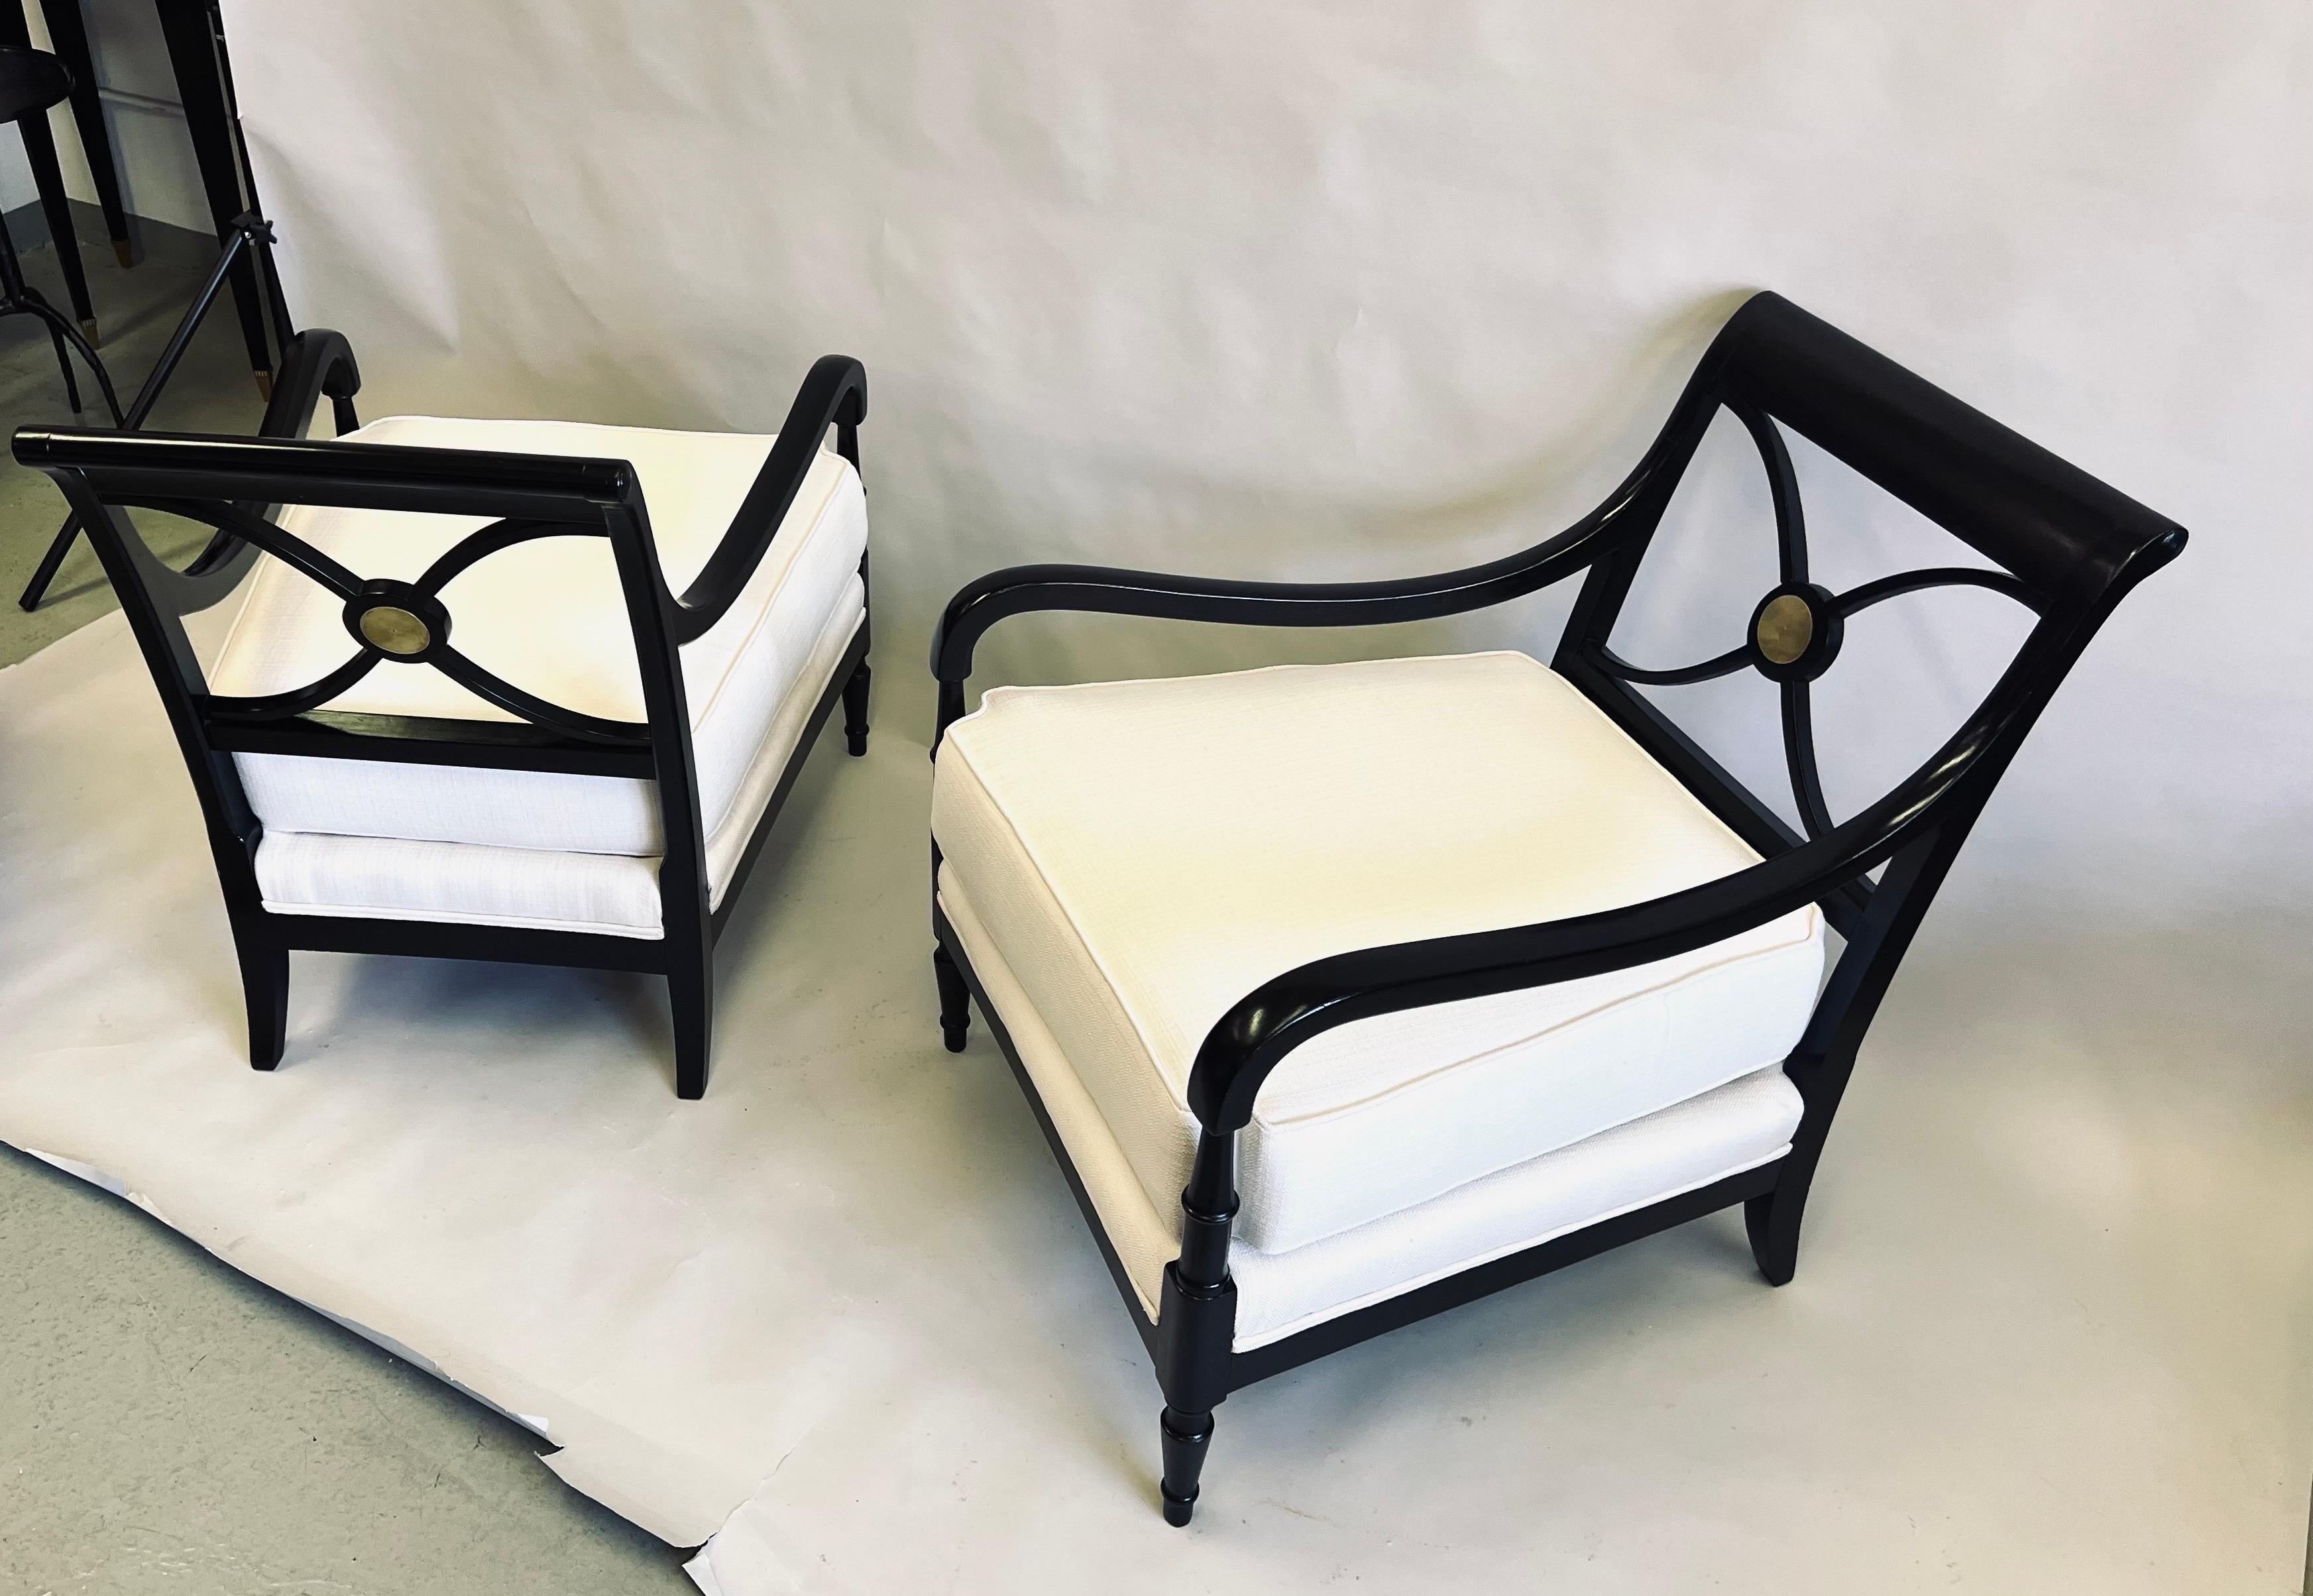 A Rare and Important Pair of French MId-Century Modern Neoclassical Armchairs / Lounge chairs by Maison Jansen, Paris, circa 1940. These elegant chairs express the heart of  Maison Jansen furniture, they are handmade of the finest materials and